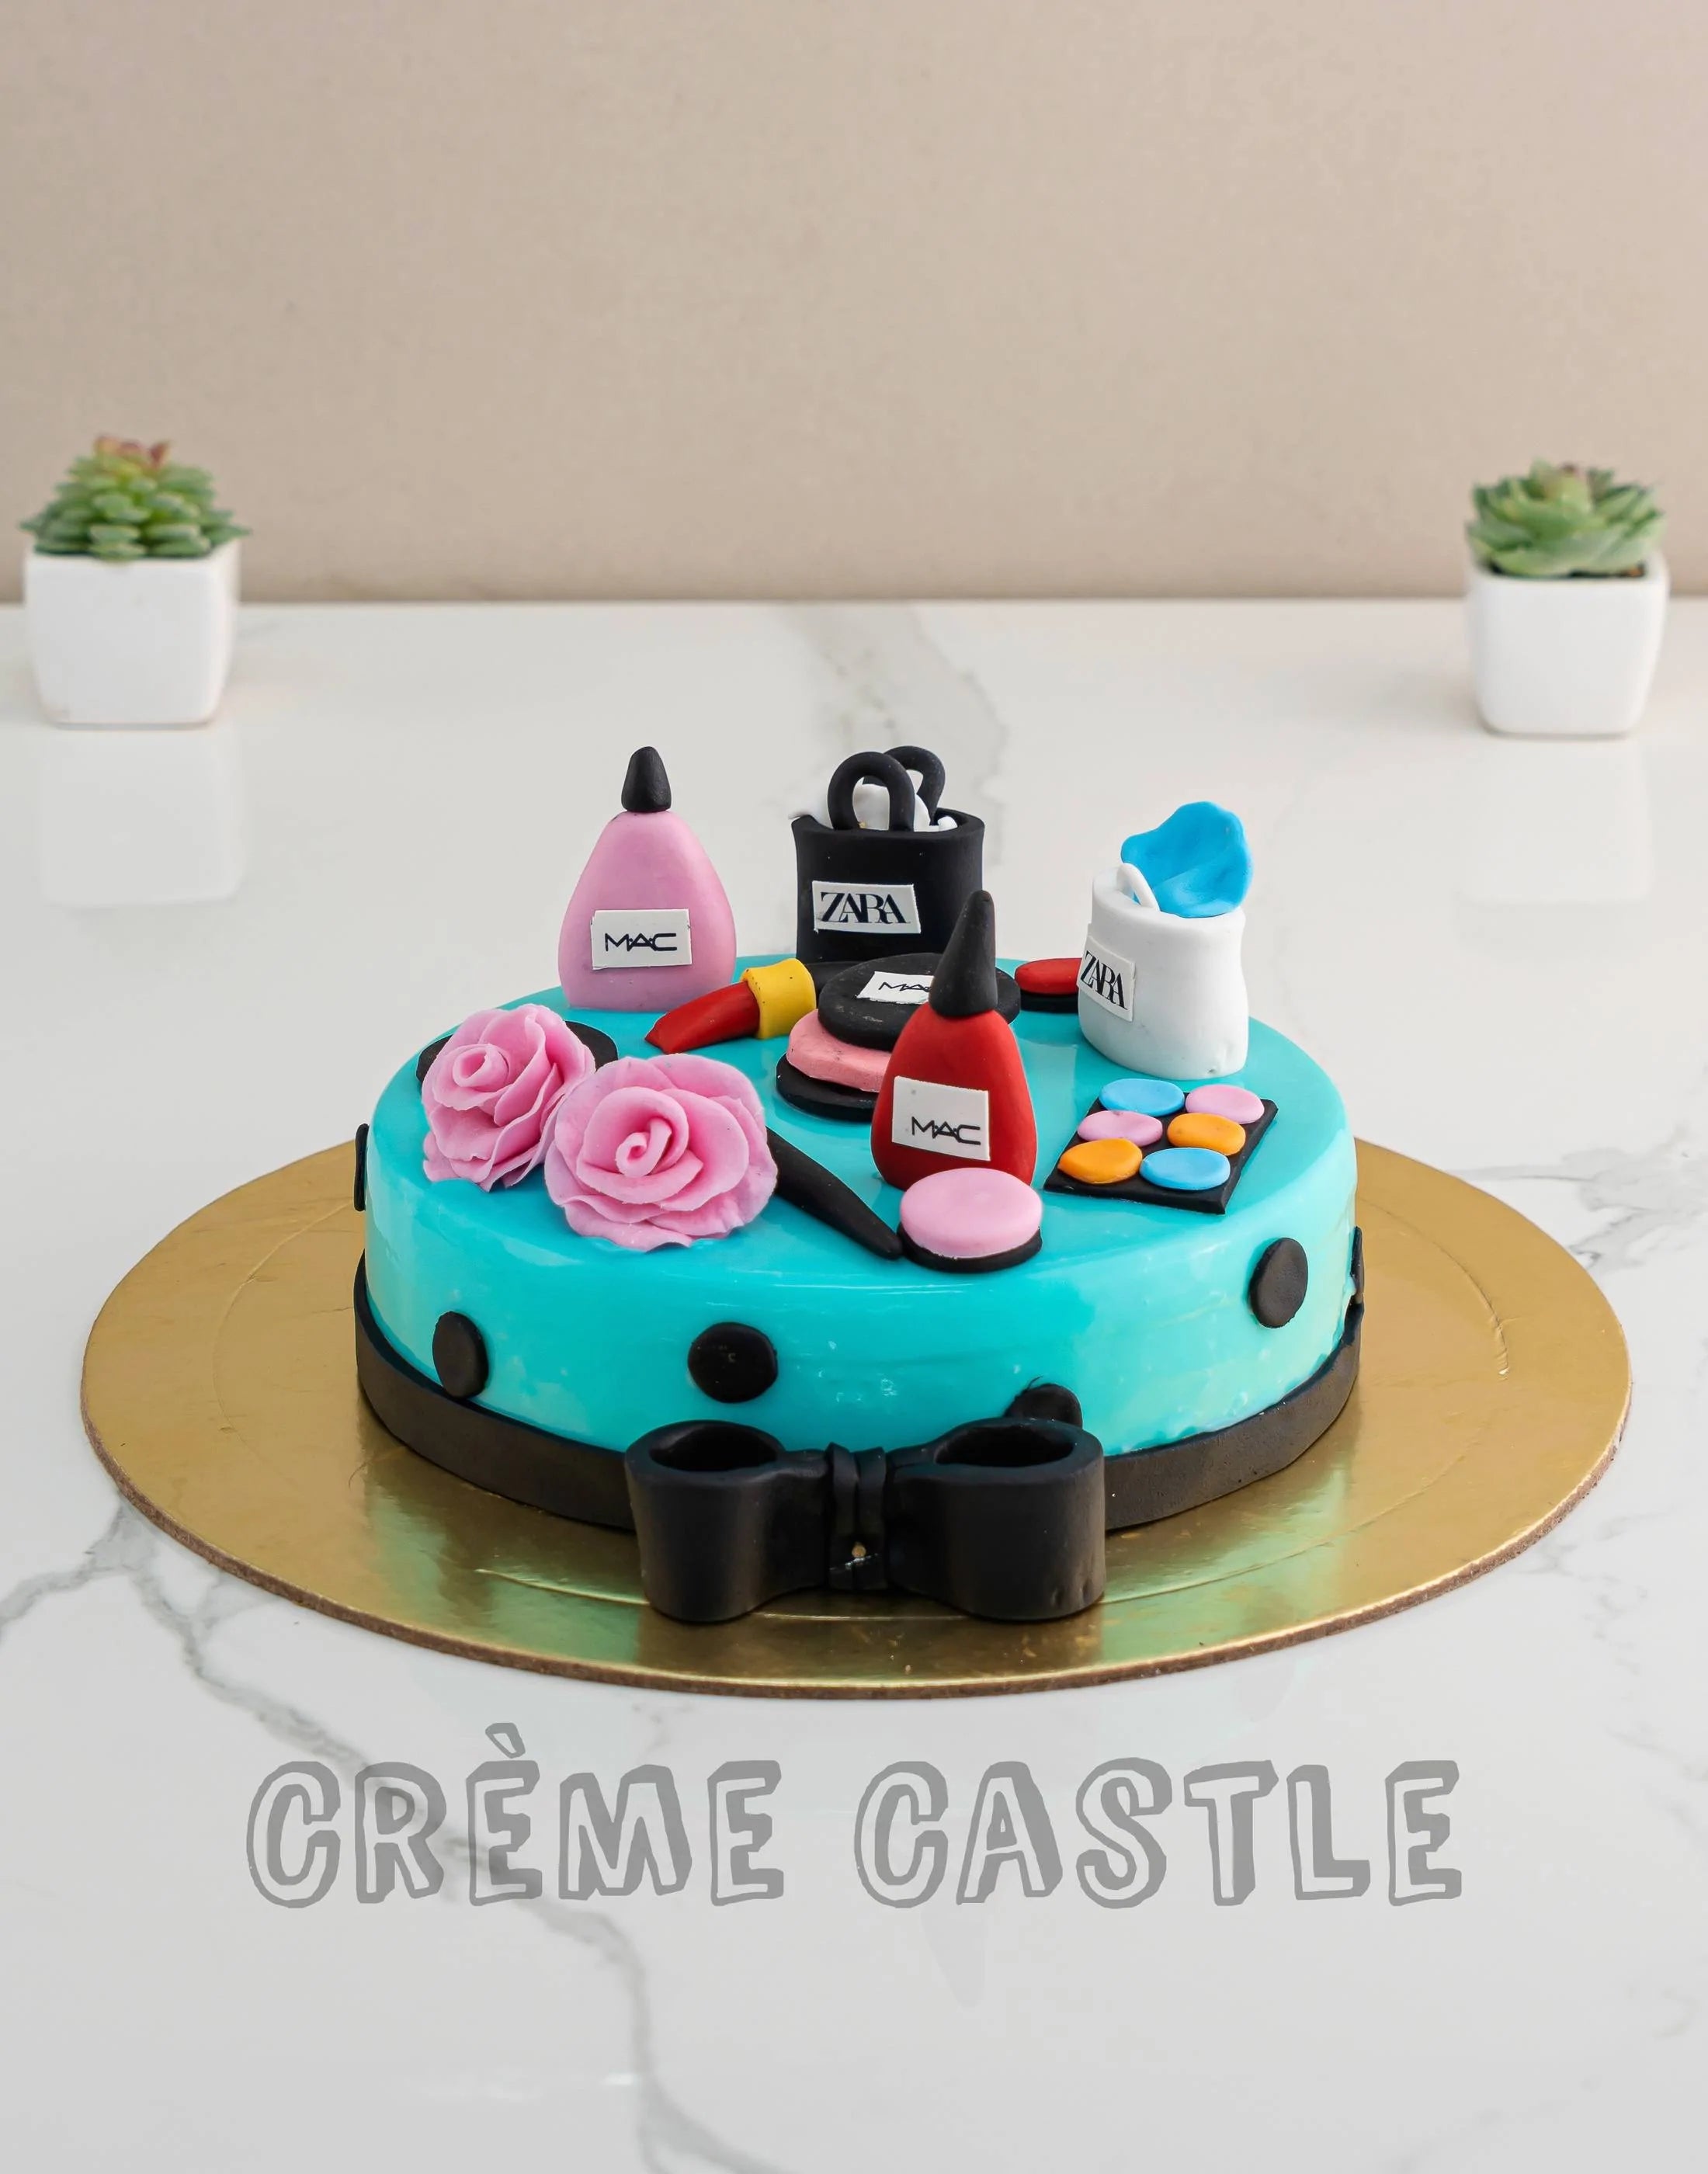 Buy Theme Cakes Online | Theme Cakes Delivery in India - MyFlowerTree